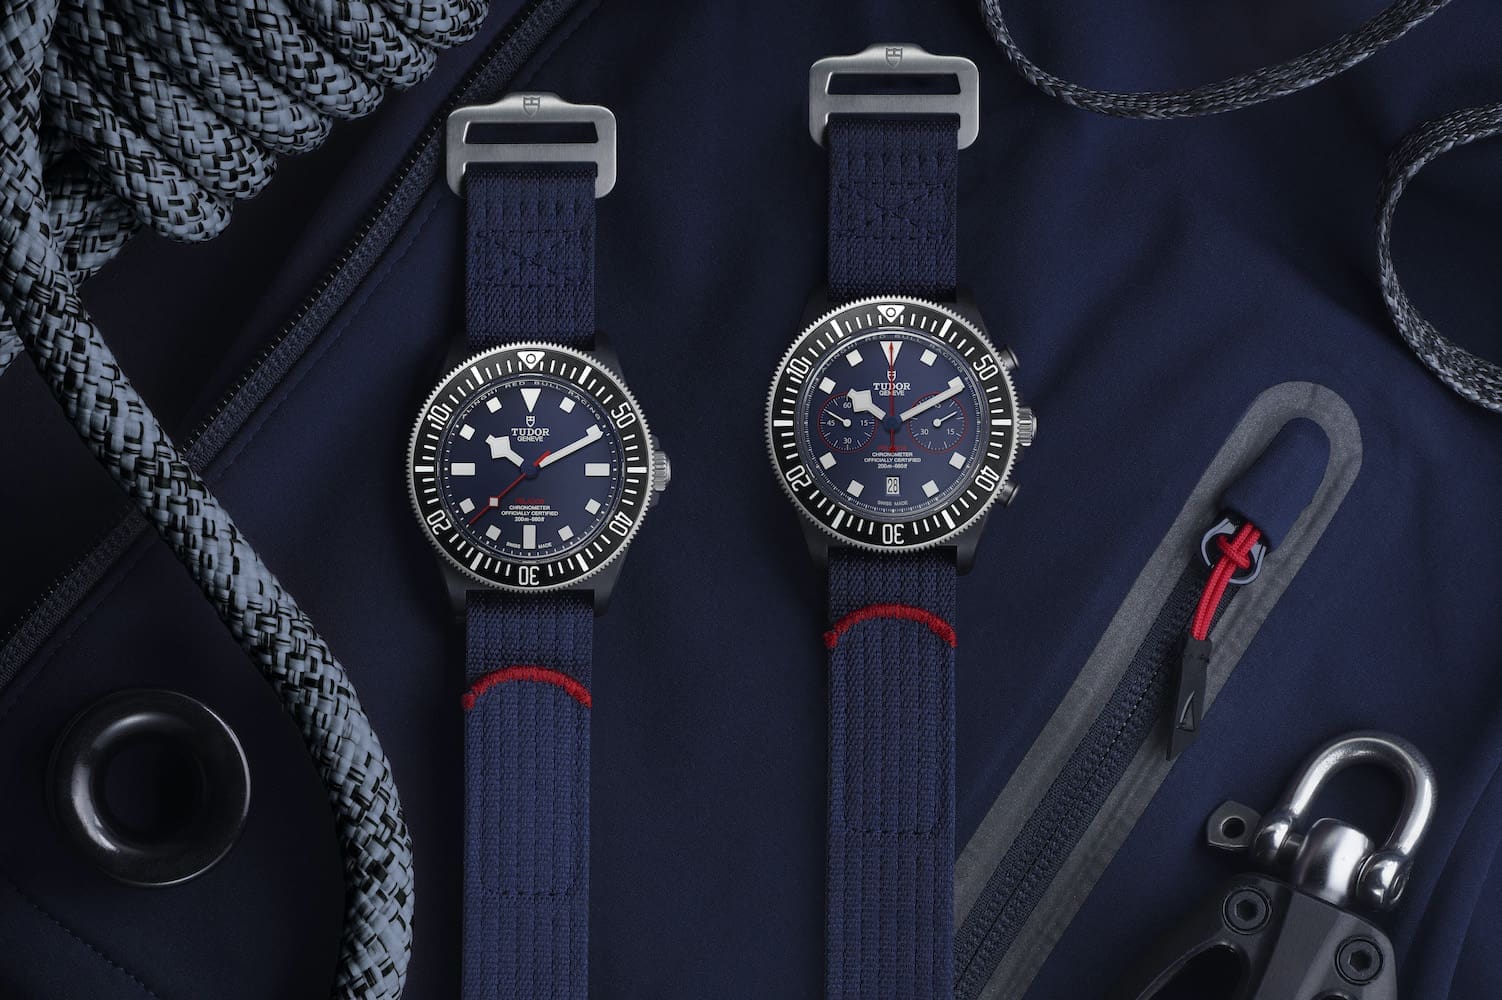 The Tudor Pelagos FXD Alinghi Red Bull Racing Editions show off the FXD’s potential